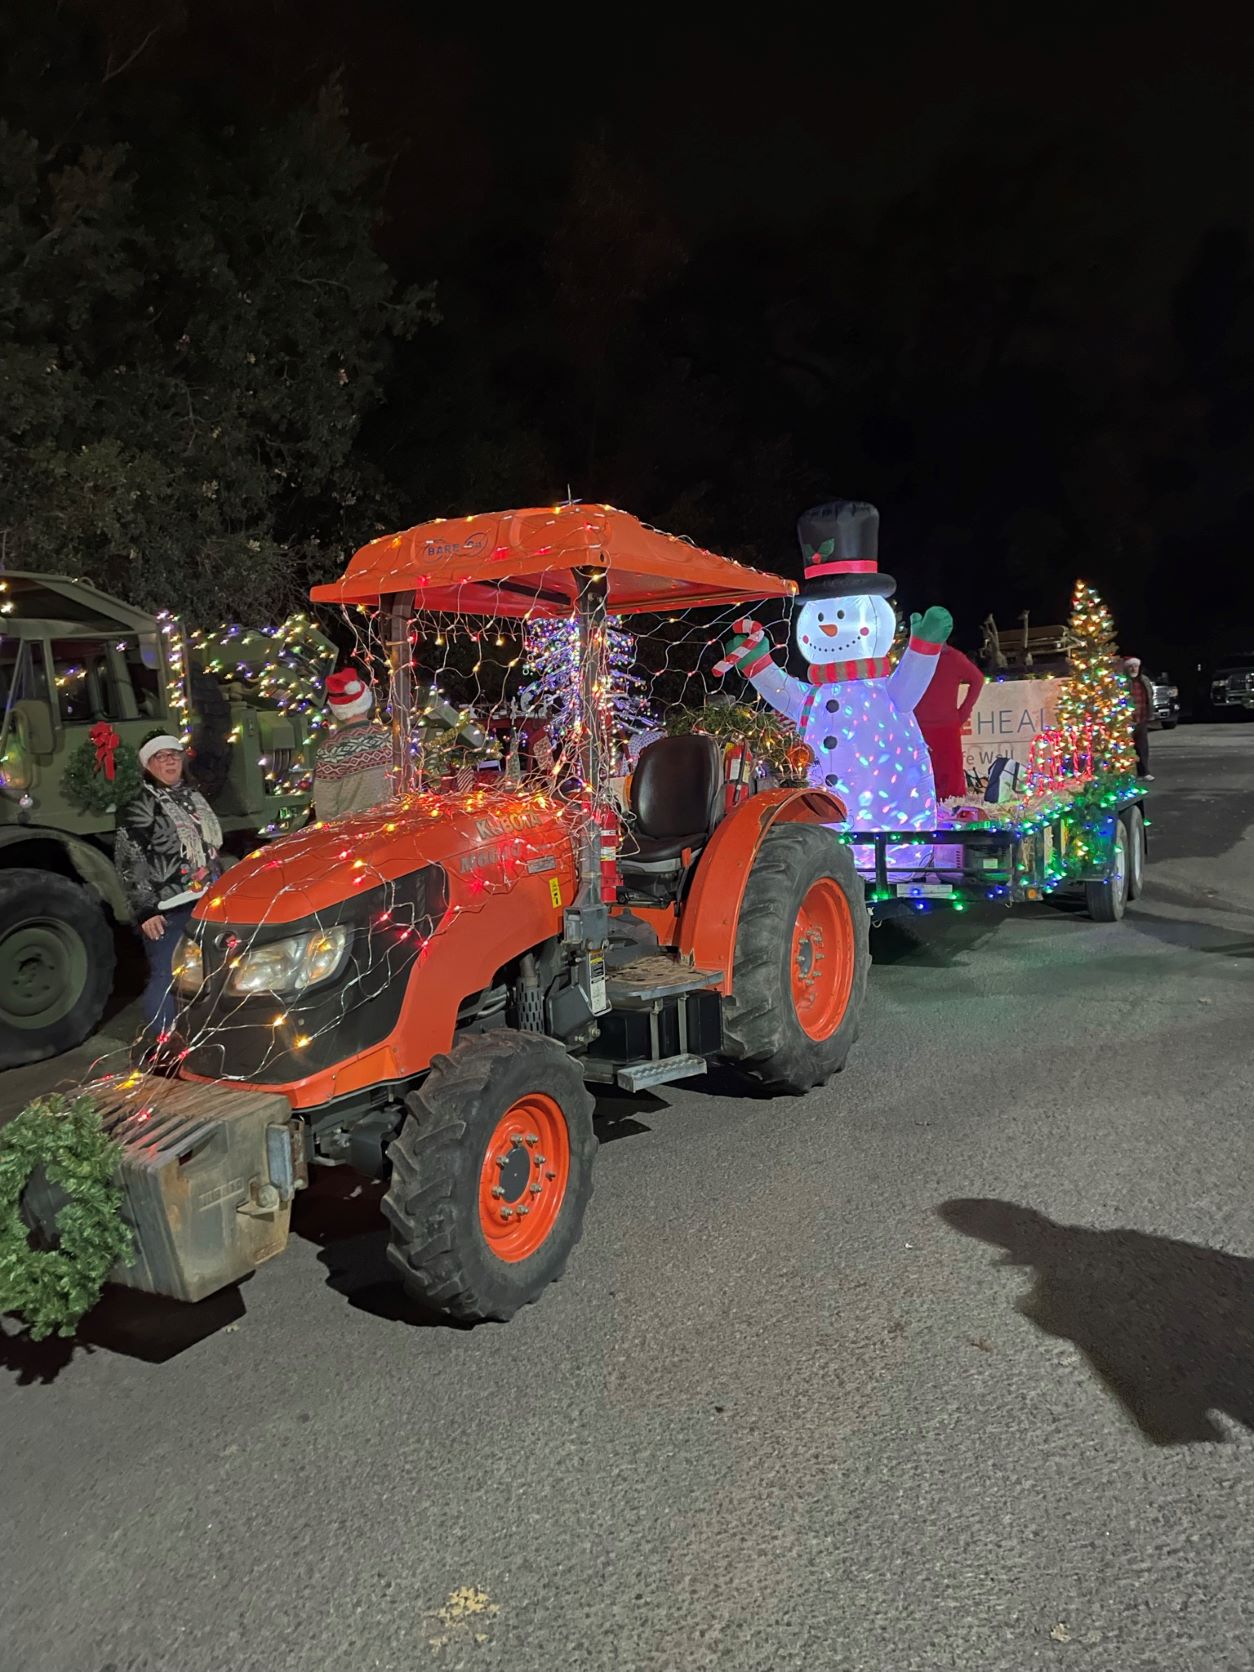 Calistoga Lighted Tractor Parade